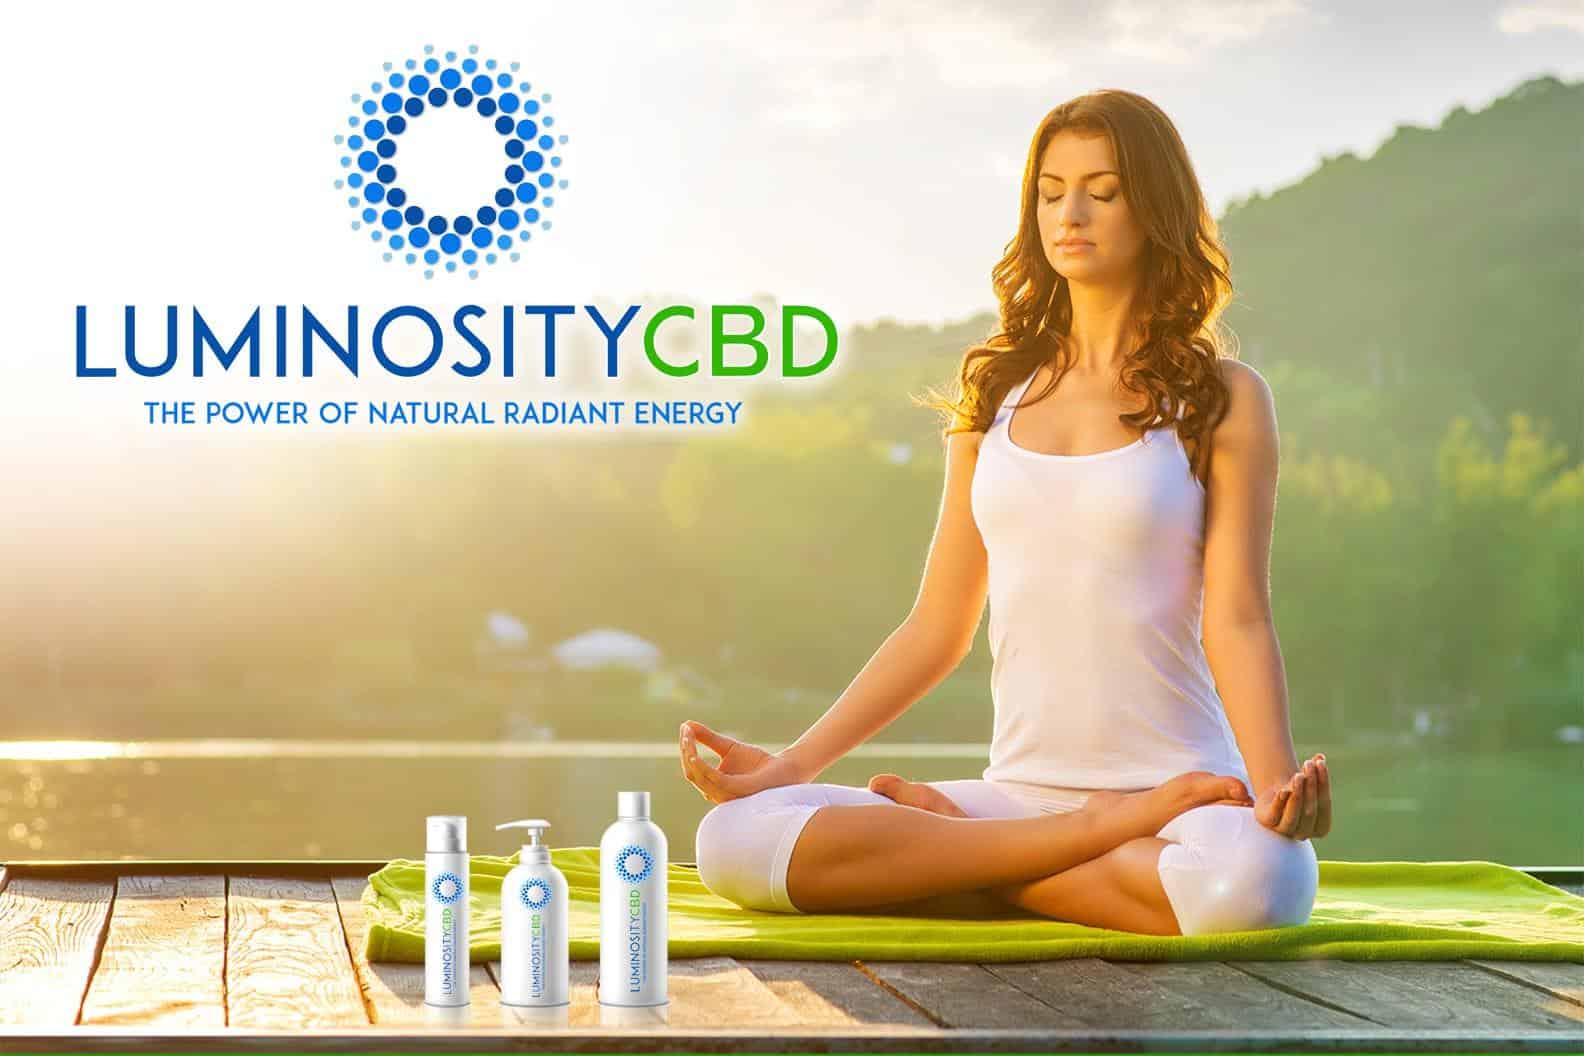 WOW Factor CBD Woman Yoga - relax in nature - WOW Factor Digital